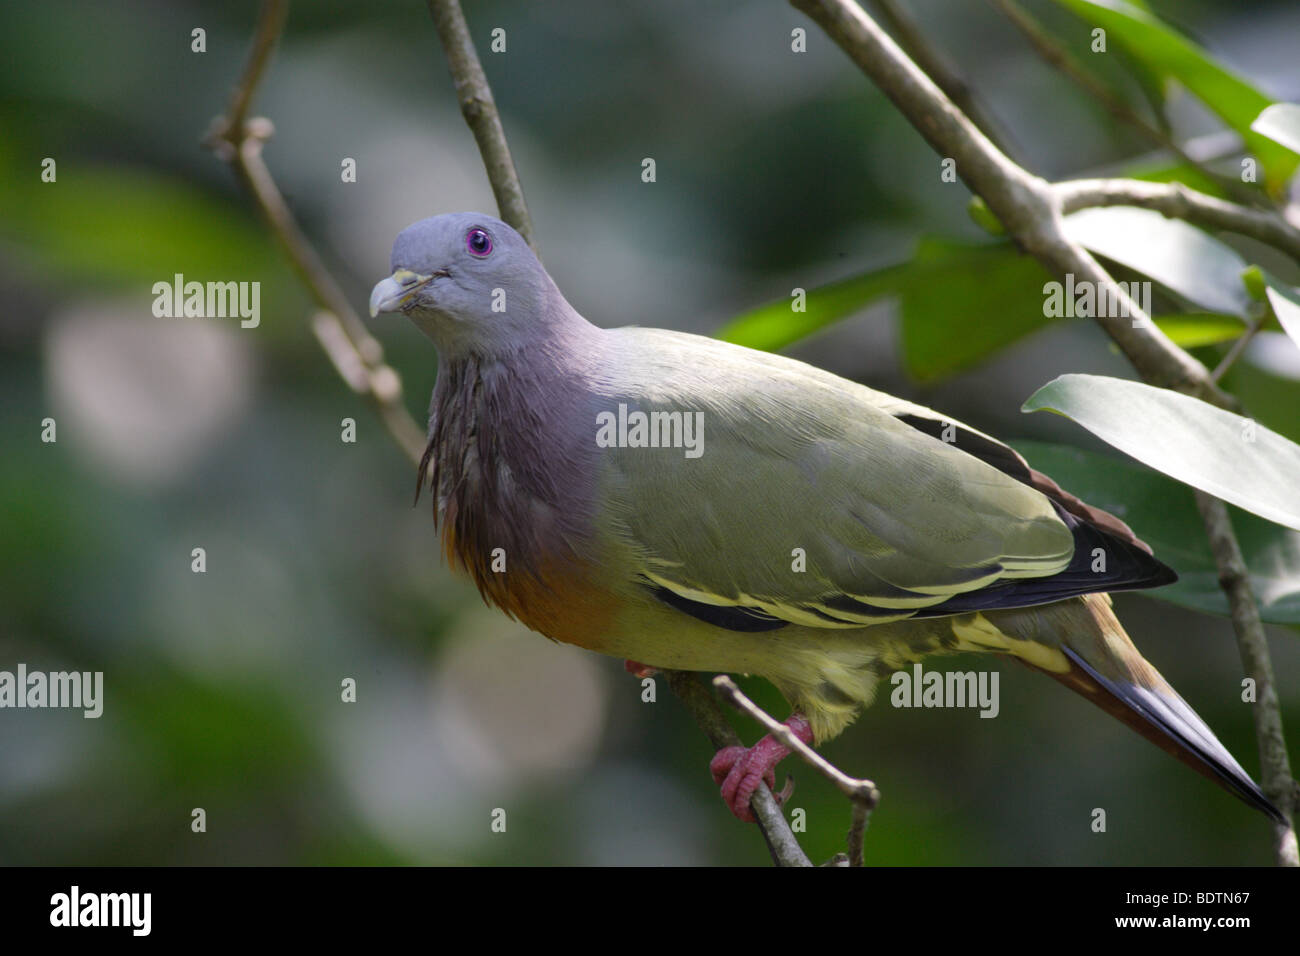 A common bird as seen in Malaysian tropical rainforests. Stock Photo